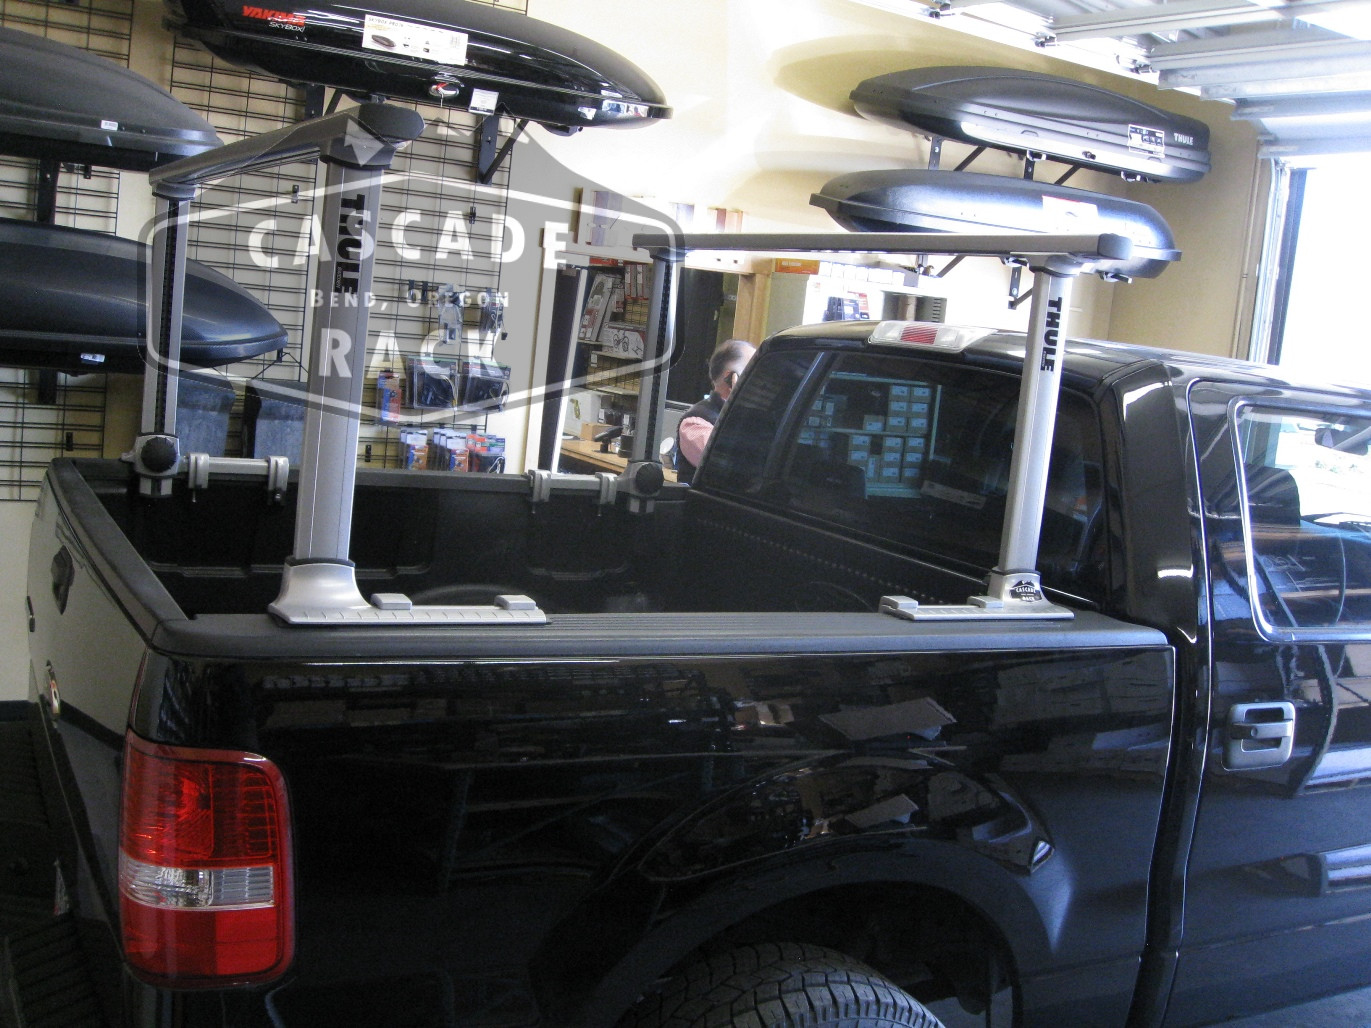 2013 Ford F-150 - Bed Rack Installation - Thule